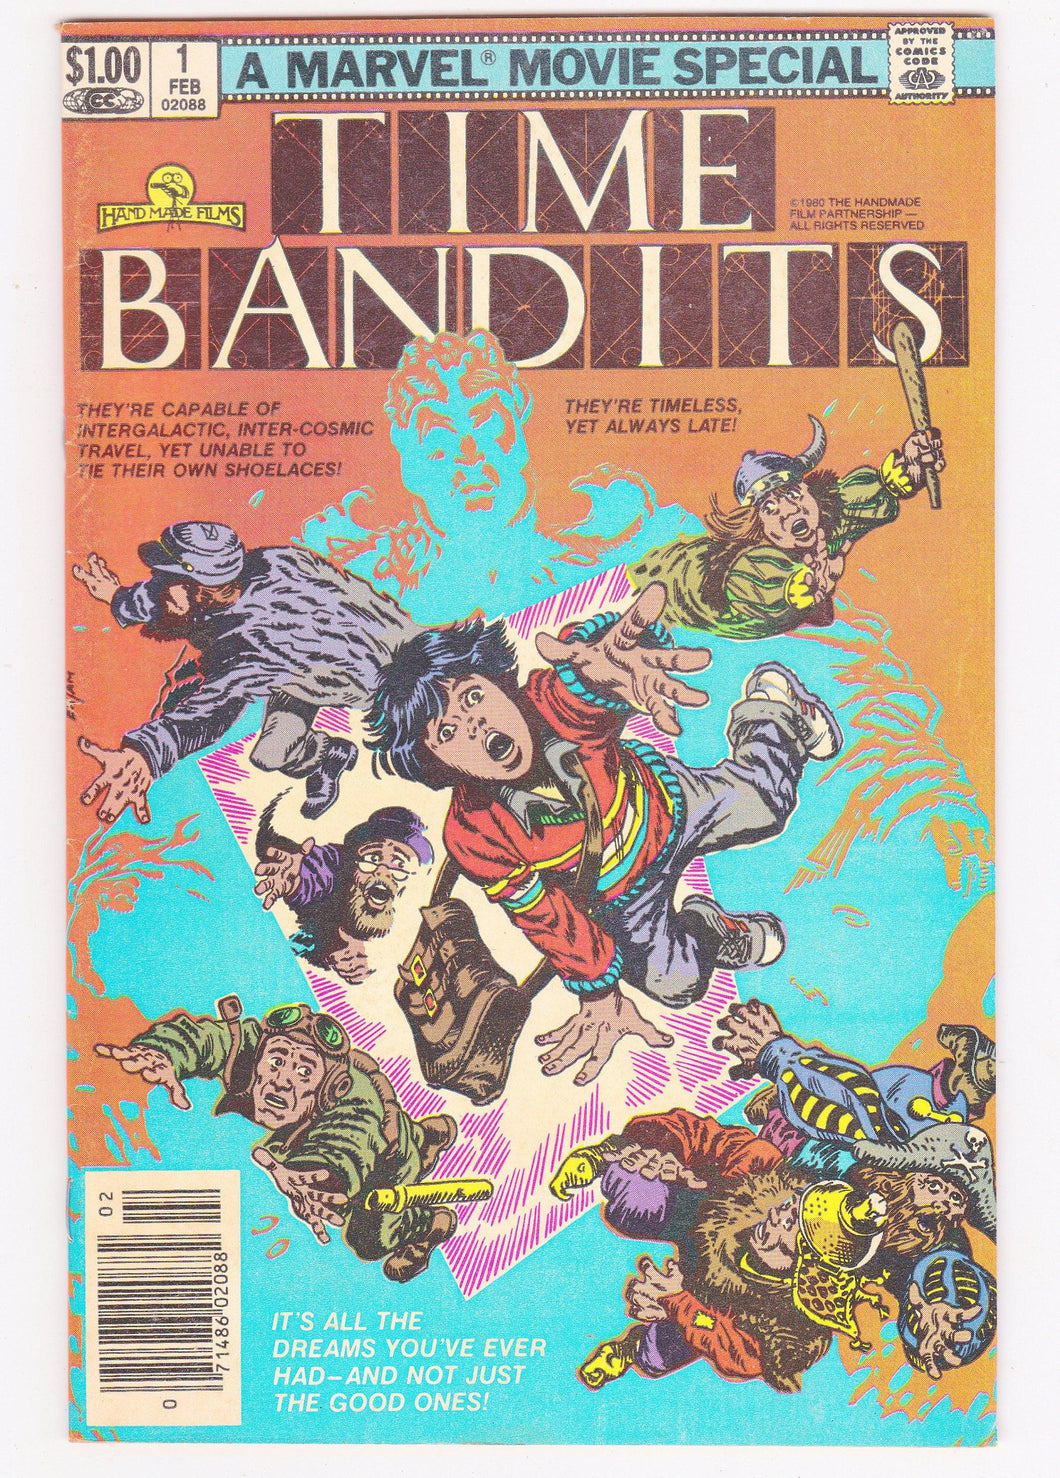 Time Bandits 1 February 1982 Marvel Movie Special Comic Book - TulipStuff